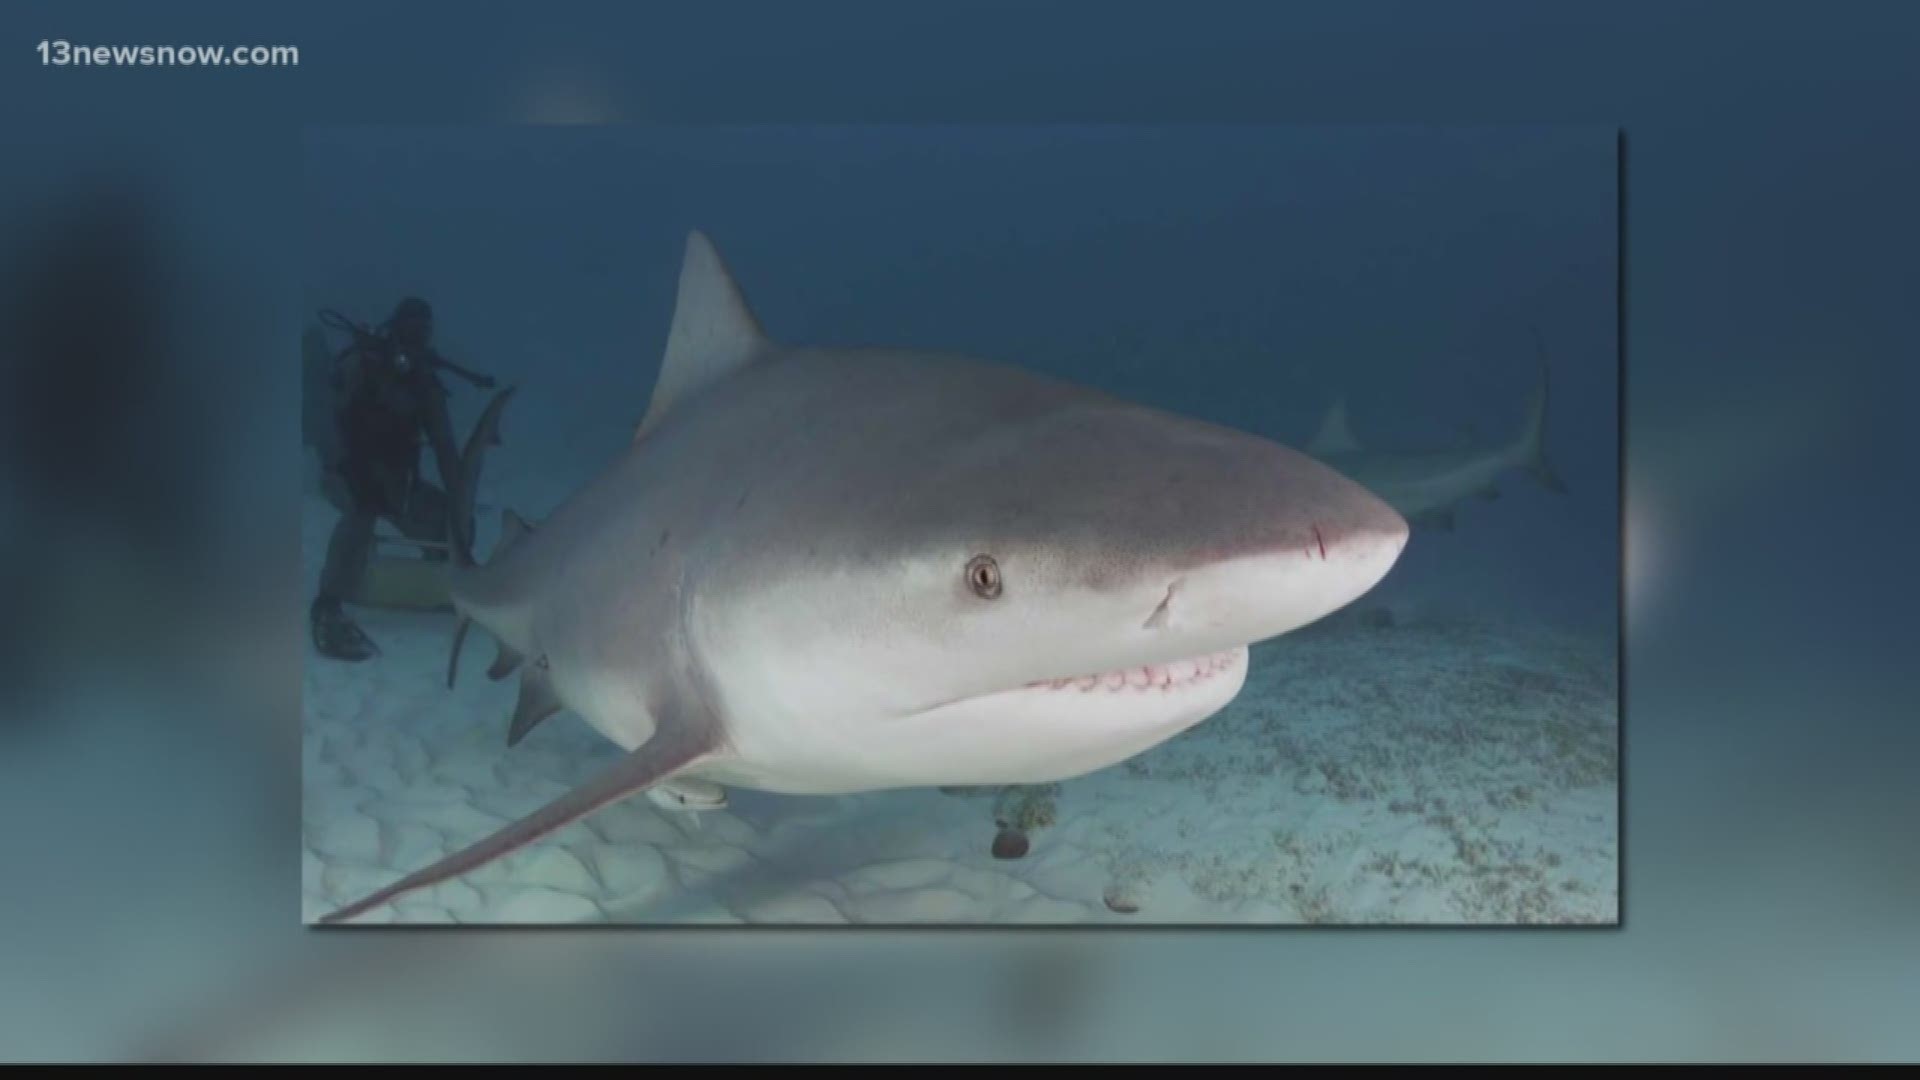 Experts say a growing number of 'bull sharks' is using the Pamlico Sound as nursing grounds.